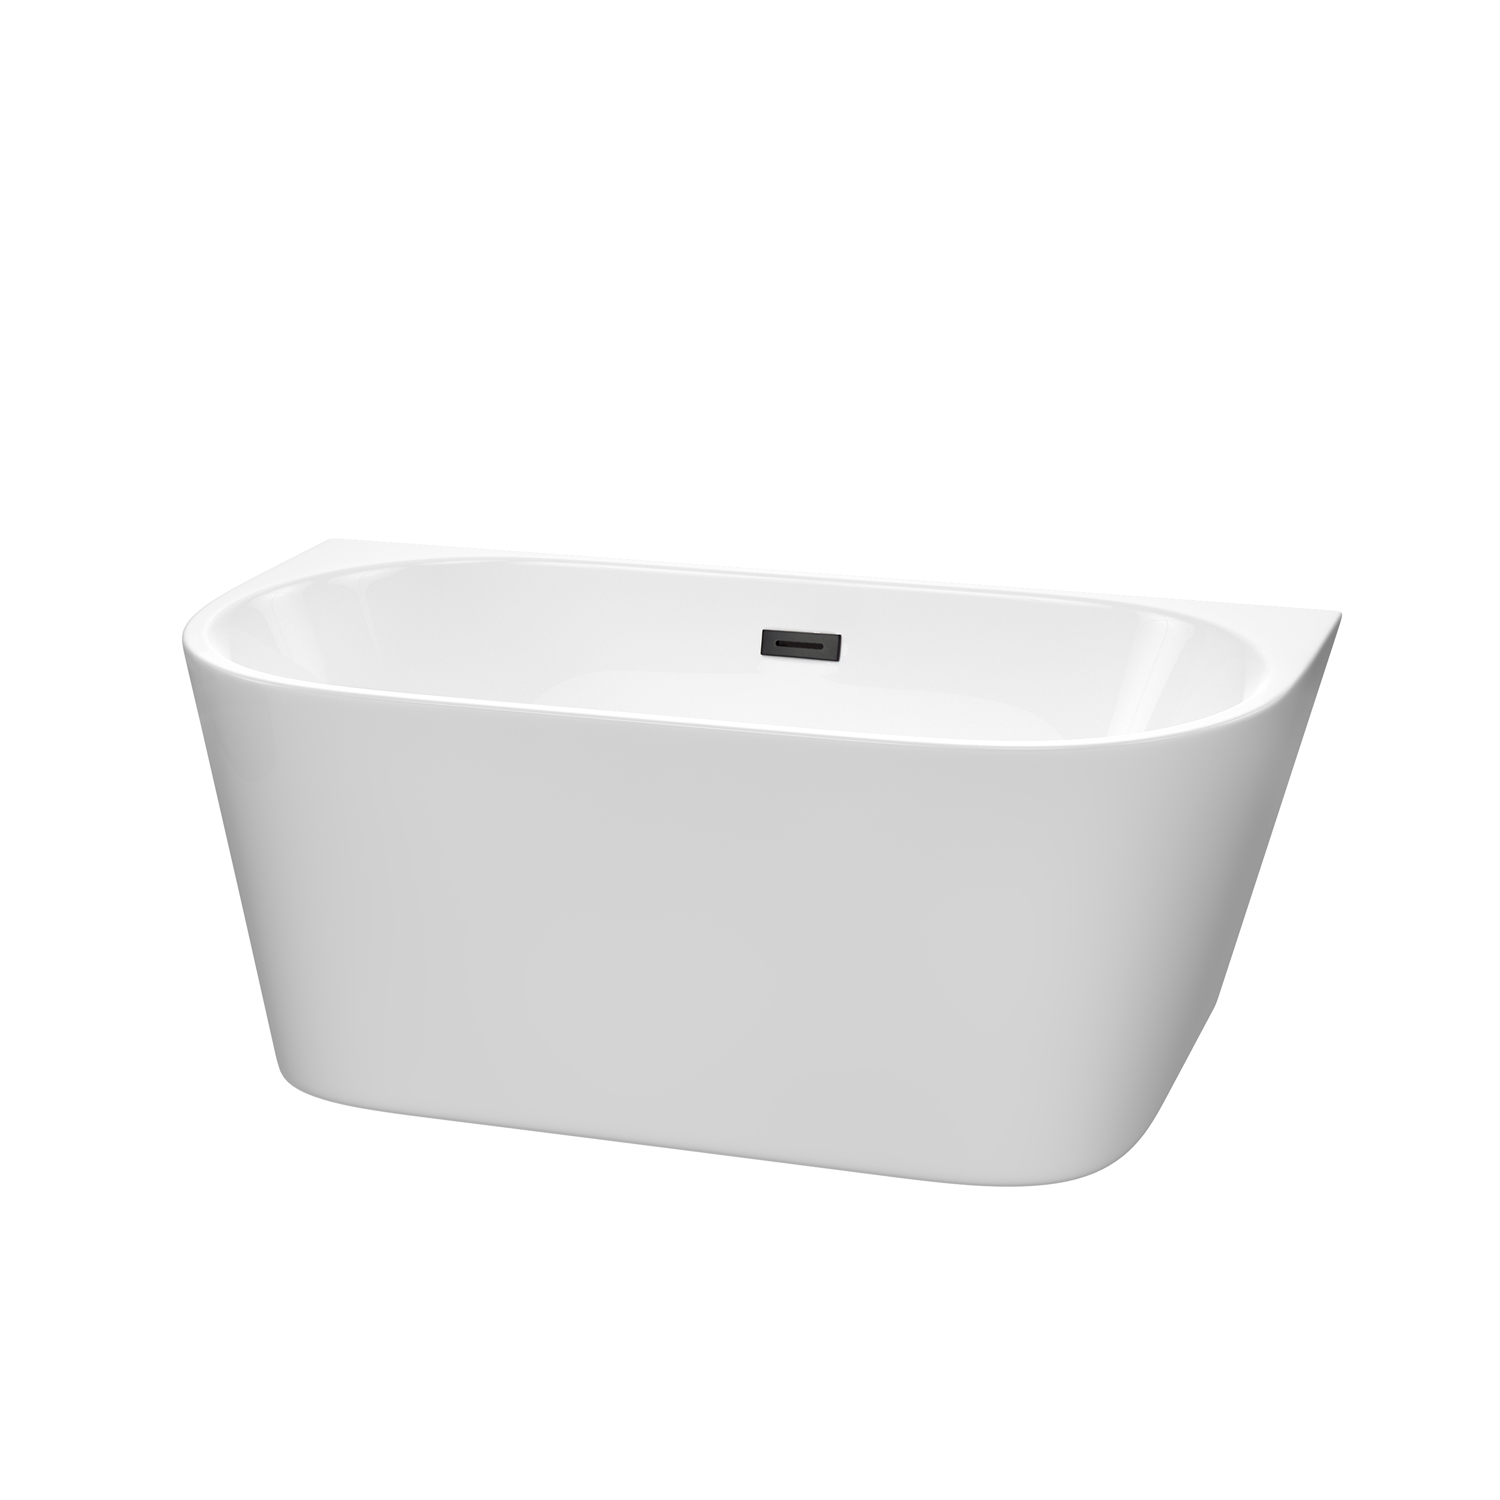 59" Freestanding Bathtub in White Finish with Overflow Trim and Matte Black Drain